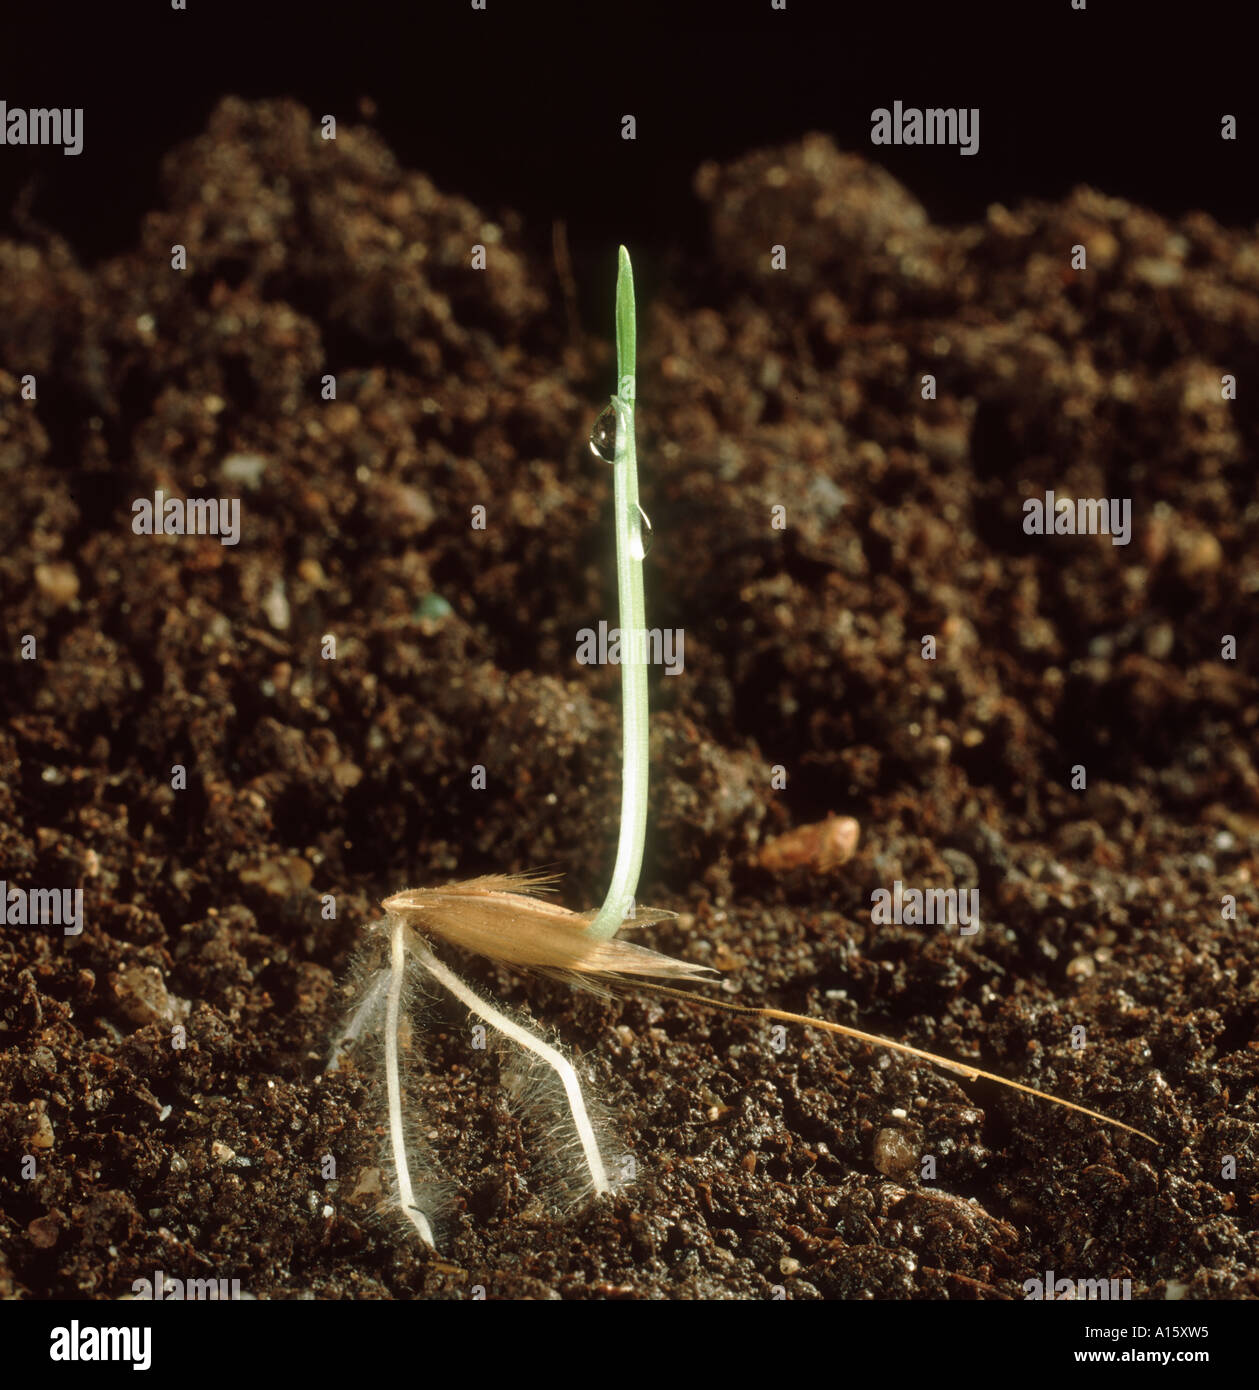 Wild Oat Avena fatua seedling penetrating the soil with its roots Stock Photo